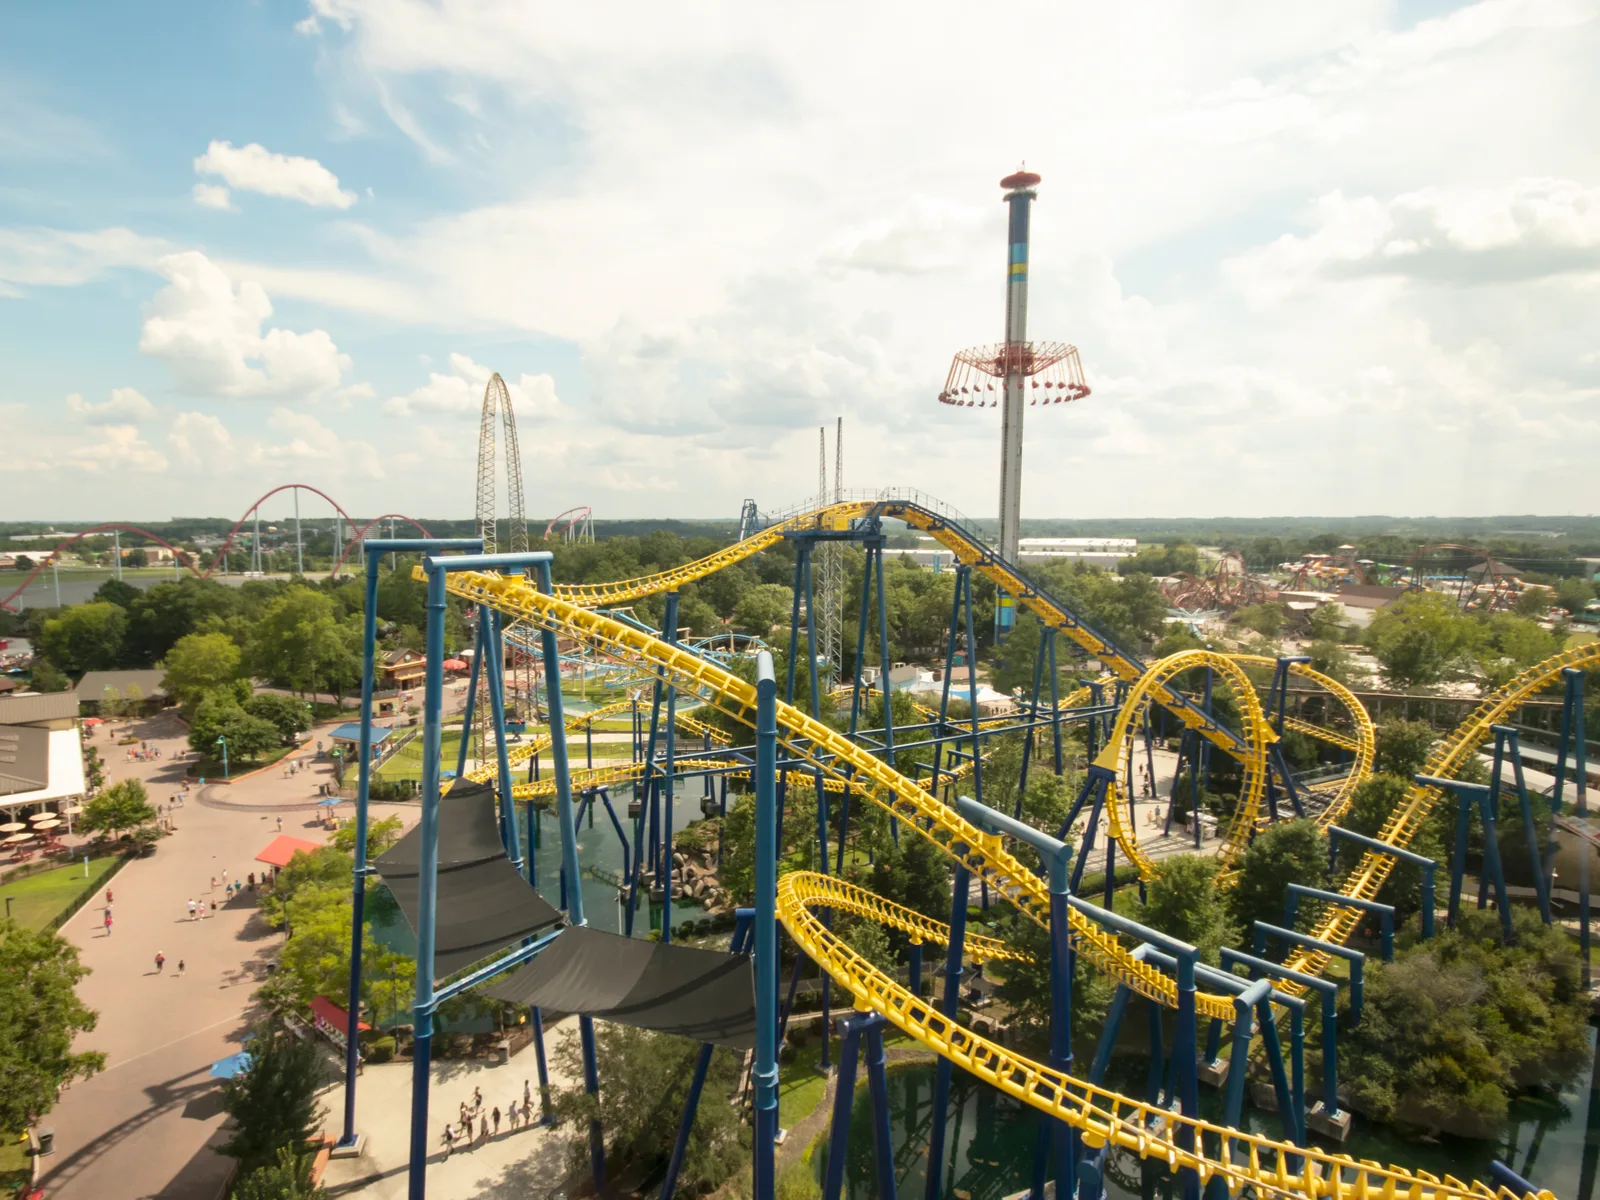 Aerial view of the Carowinds in Charlotte, North Carolina, the best place to go during summer and one of the best roller coaster parks in the US, with its yellow roller coaster tracks and other rides